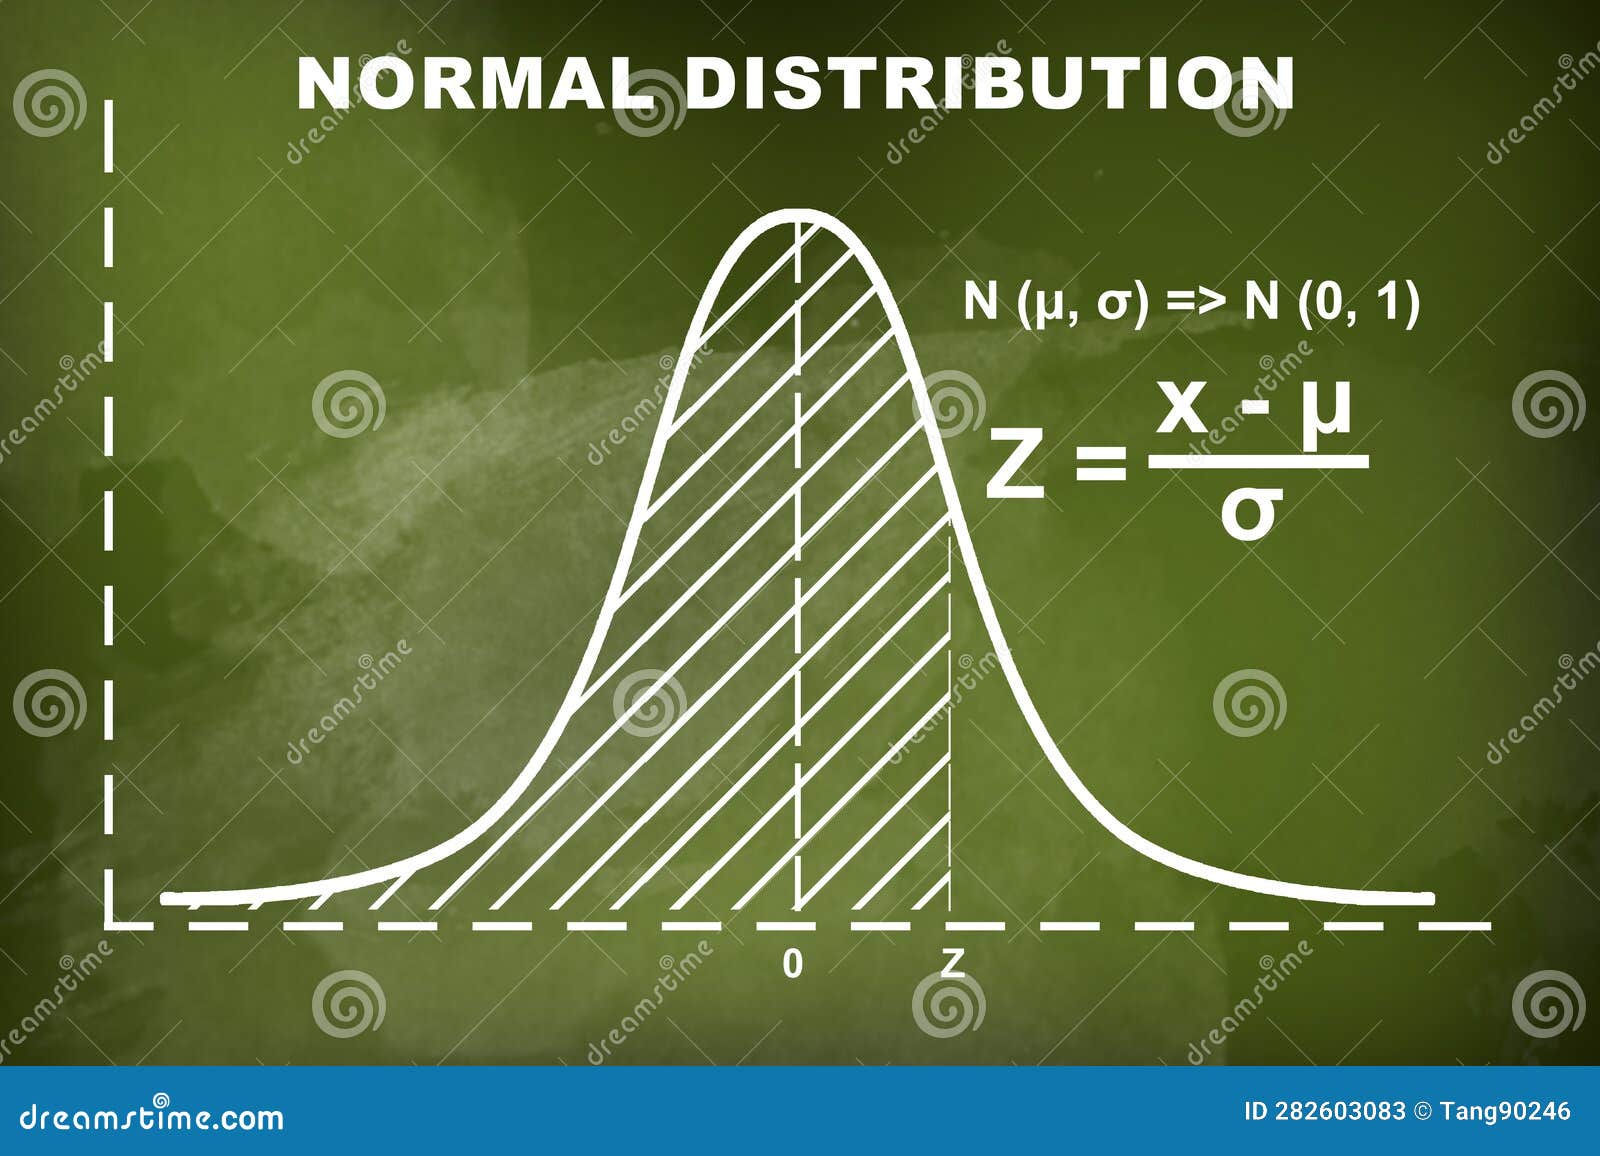 Gaussian Bell or Normal Distribution Curve on Green Chalkboard ...